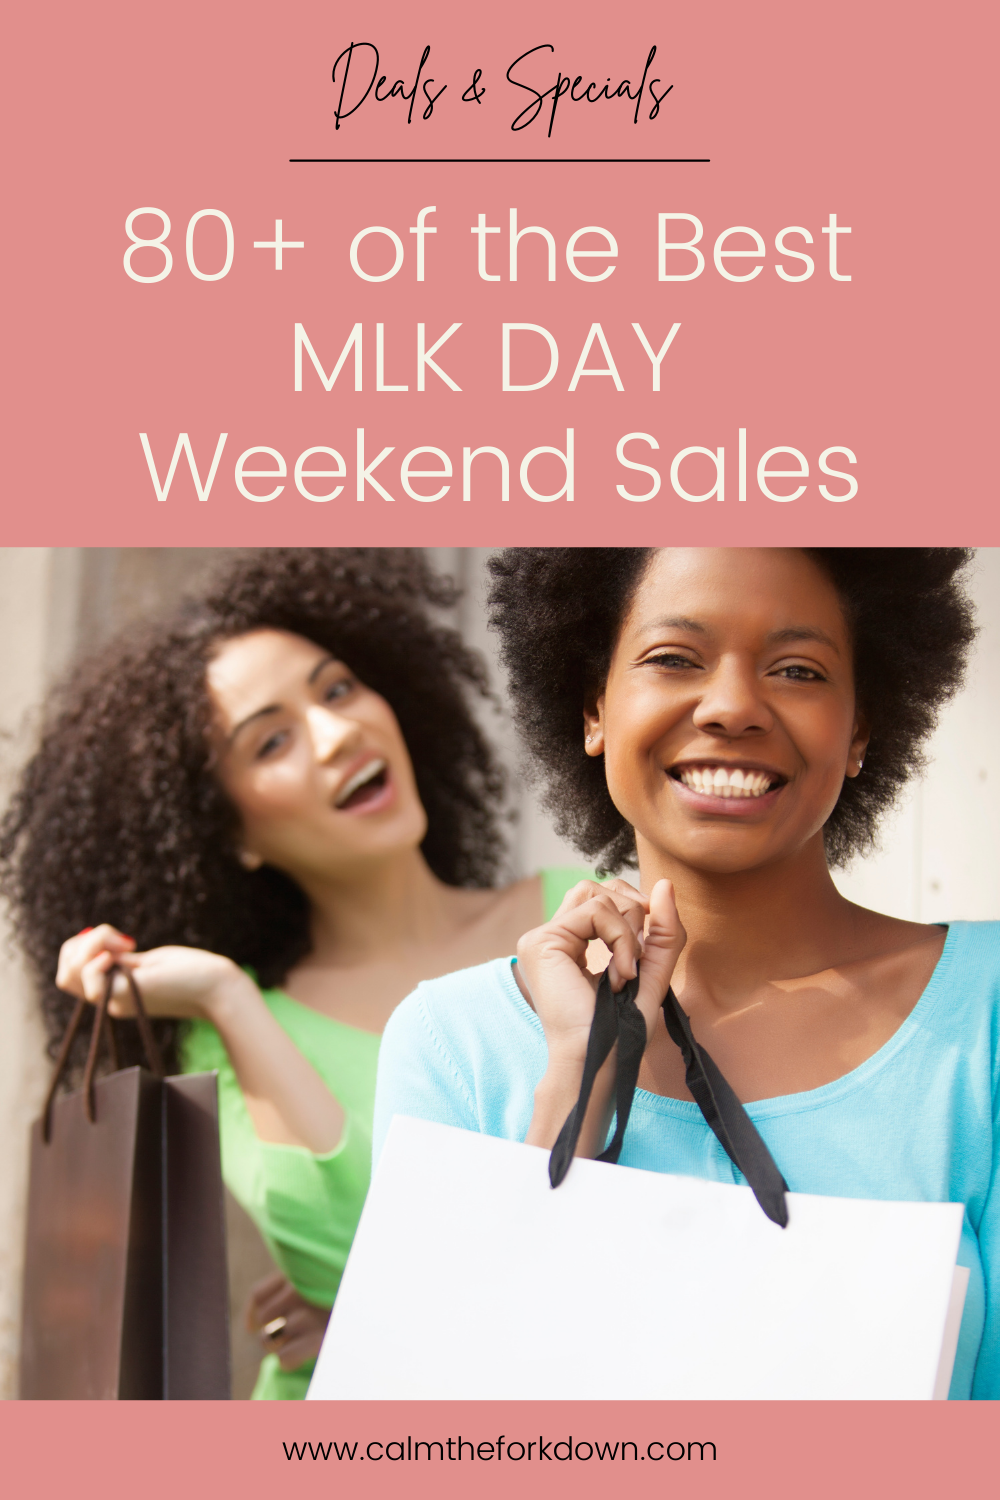 80+ of the Best MLK Day Weekend Sales